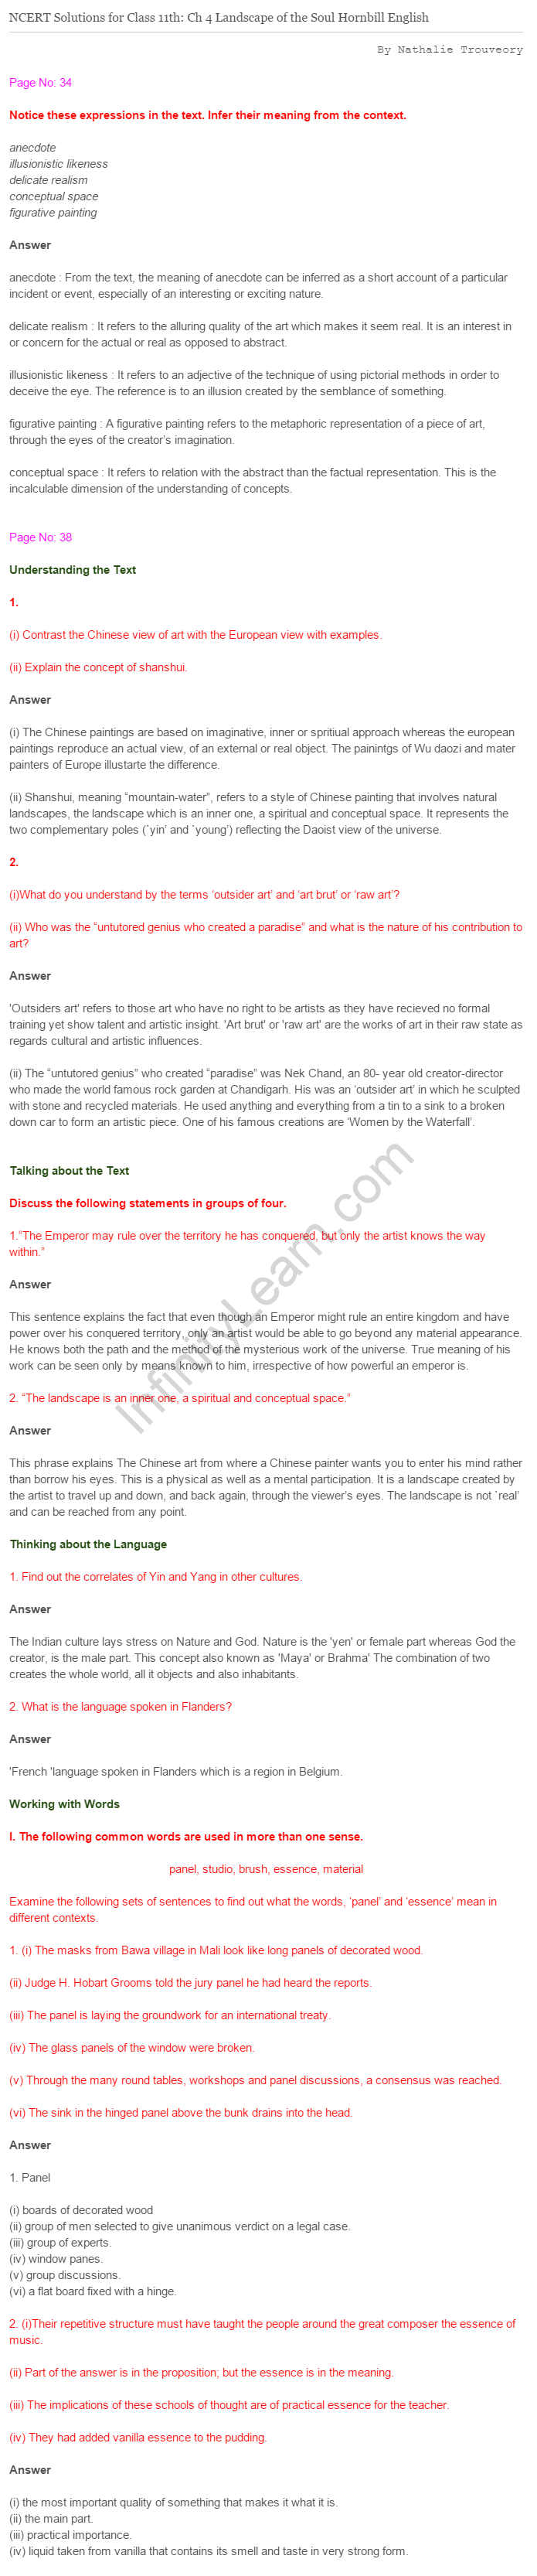 NCERT Solutions For Class 11 English Hornbill Landscape of the Soul